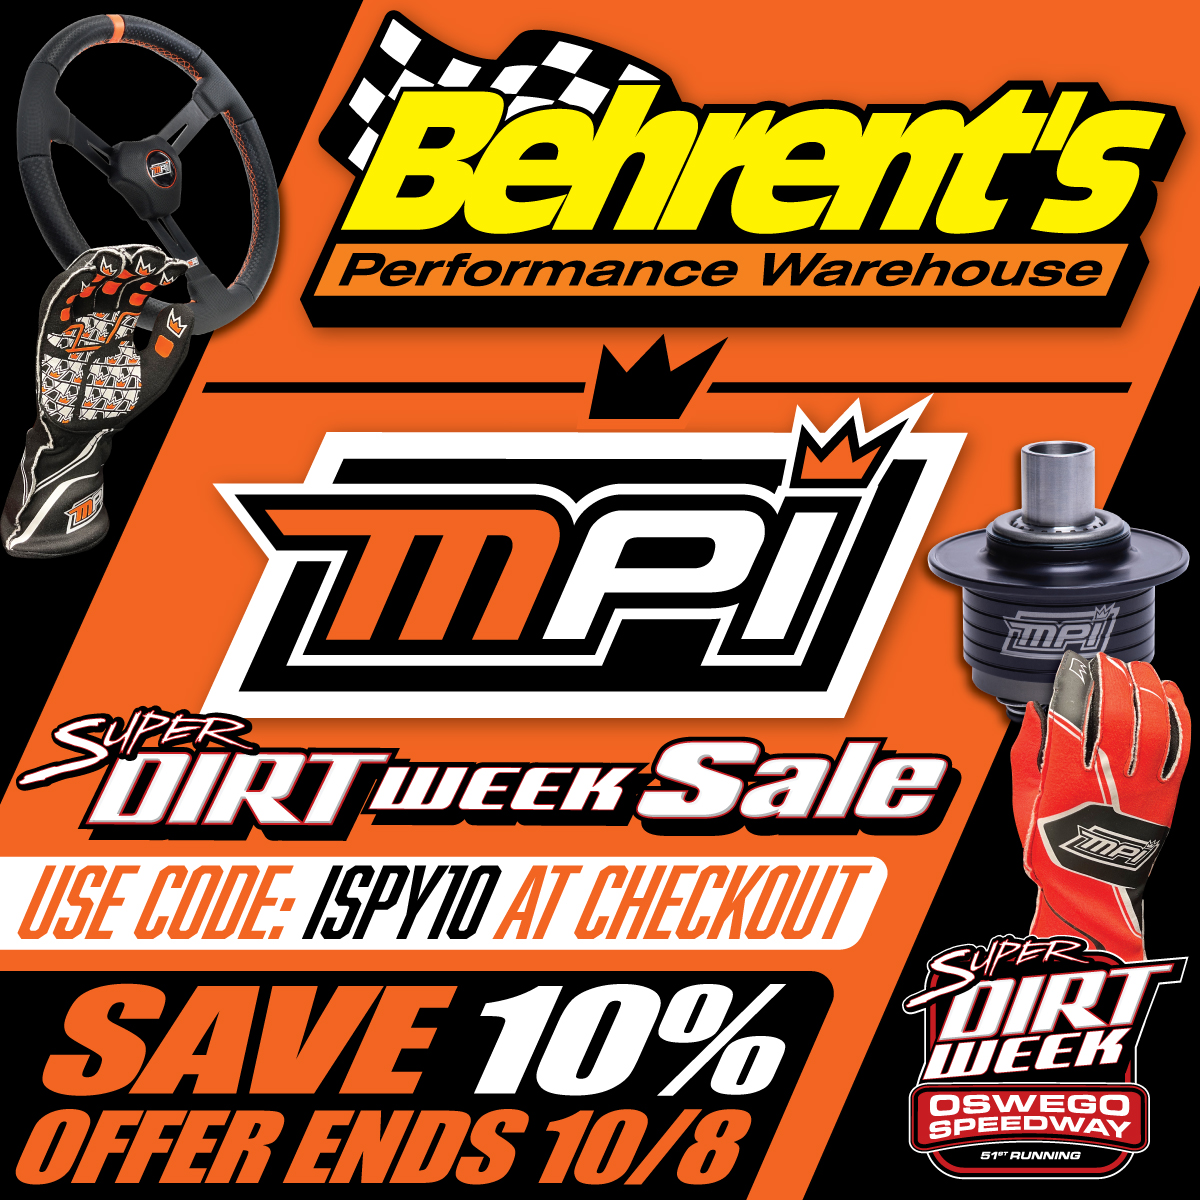 Now is your chance to get a grip on Super Dirt Week 51 with @MPI_INNOVATIONS exclusively at Behrent's! Use code: 'ISPY10' at checkout to save 10% off on all MPI products, some exclusions apply. 👉behrents.com/brand/max-papi… #ispympi #superdirtweek51 #ispy10 #behrents